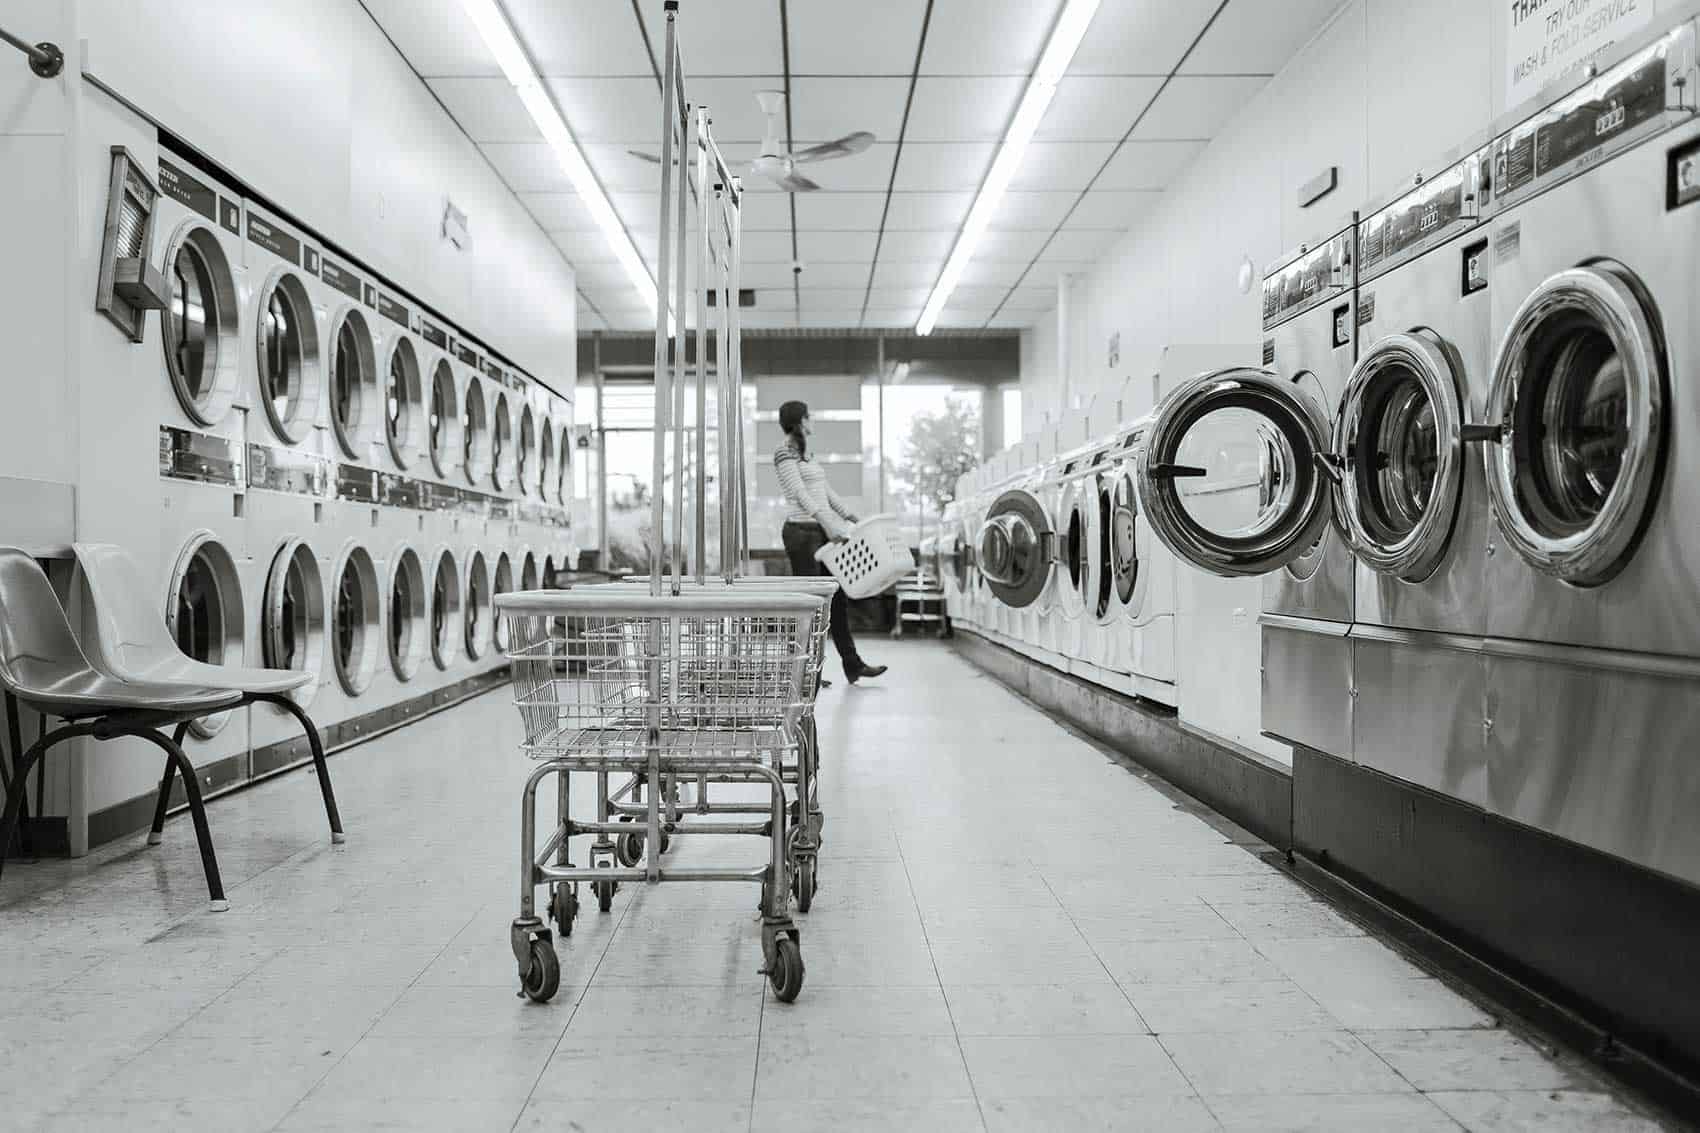 Complete Guide to Opening a Laundromat Business in 2022